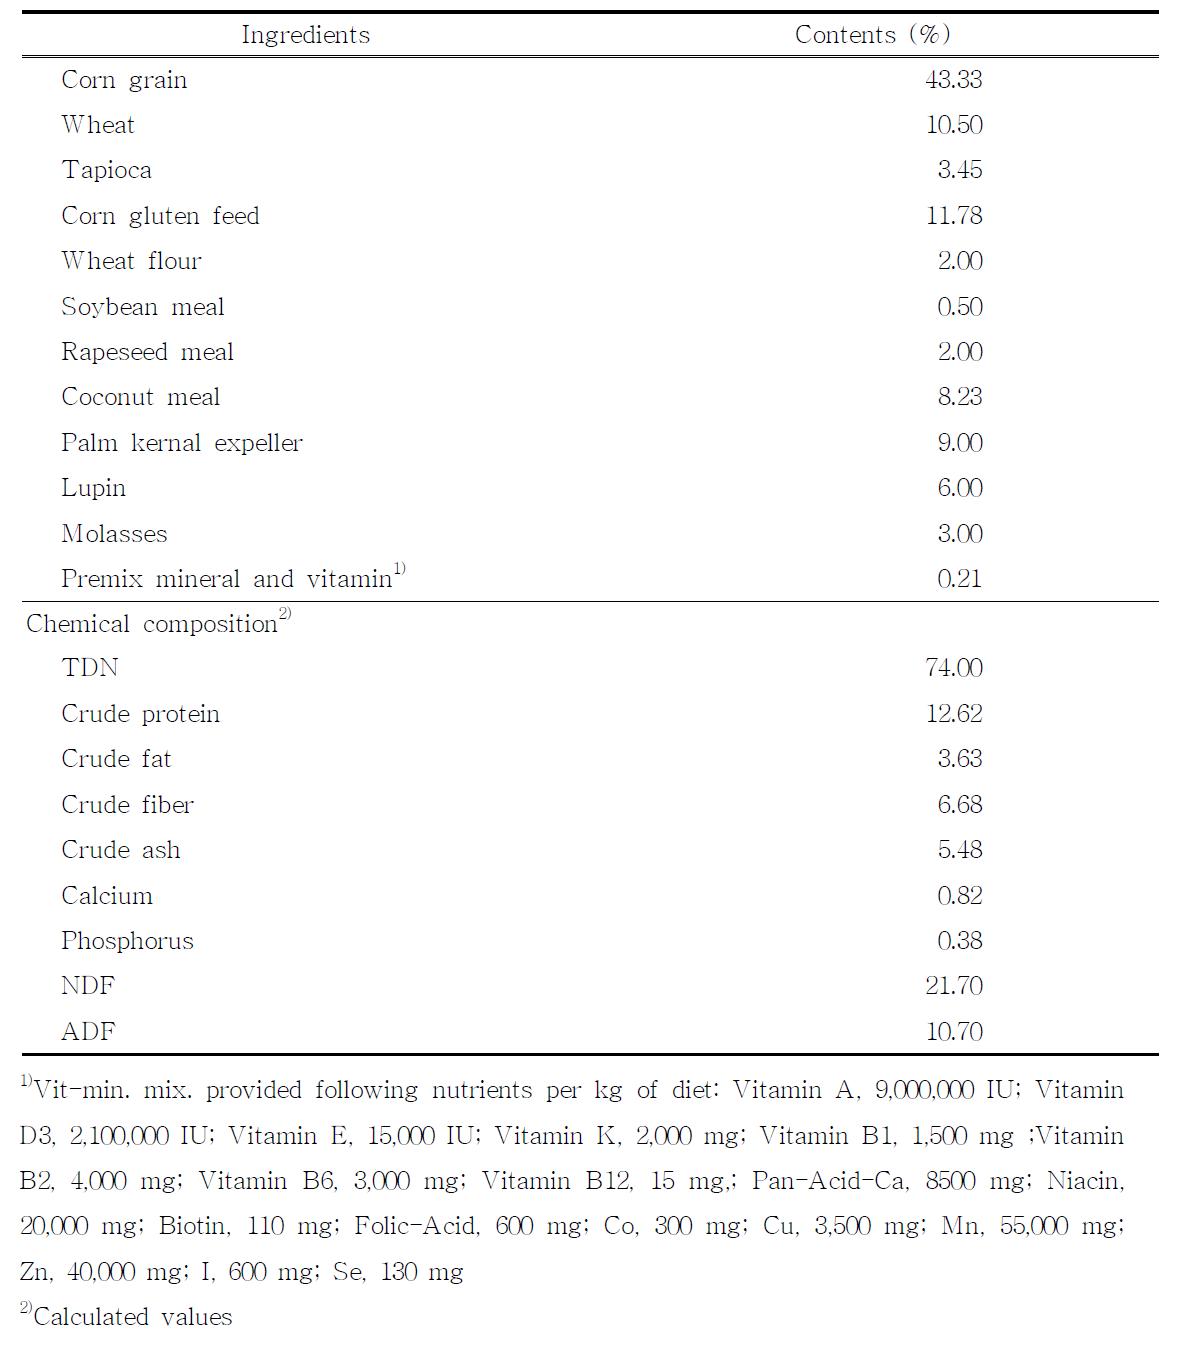 Feed formula and chemical composition of experimental feed